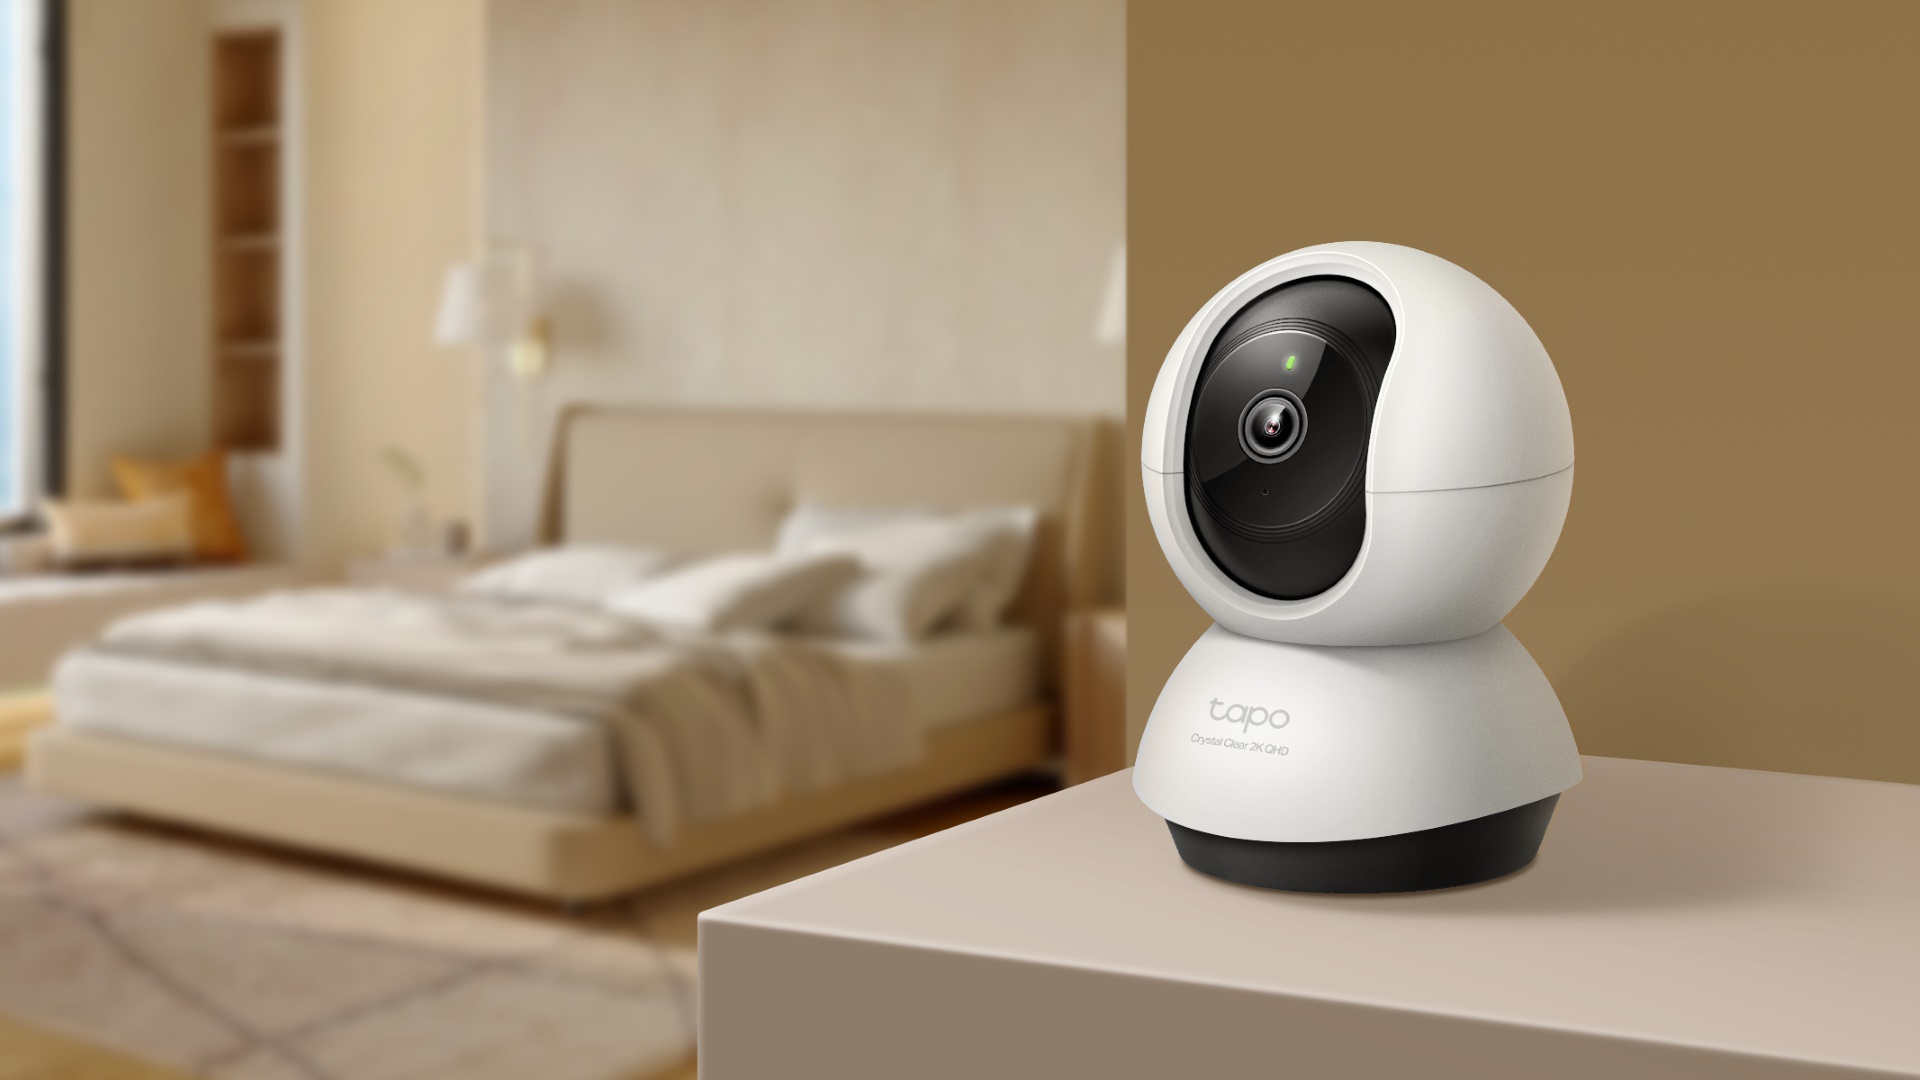 New Tapo C220 security camera features AI tracking - GadgetMatch